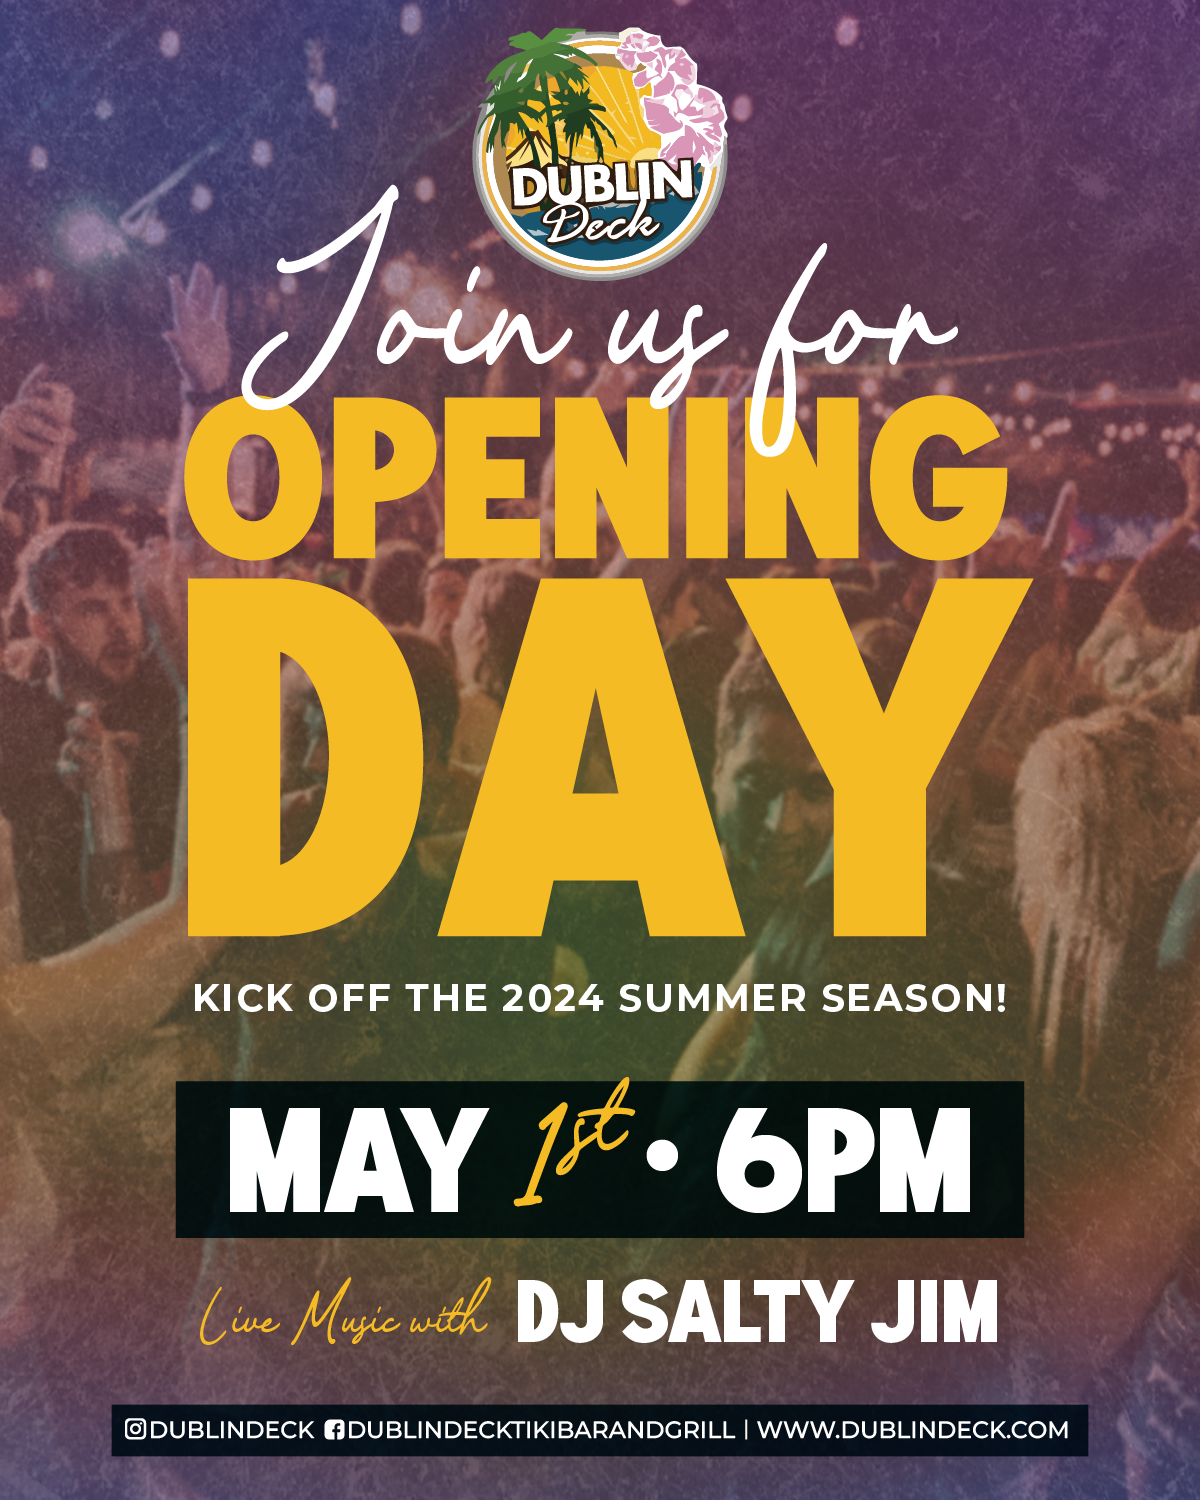 Kick off the 2024 Dublin Deck season with us and DJ Salty Jim spinnin' at 6PM!